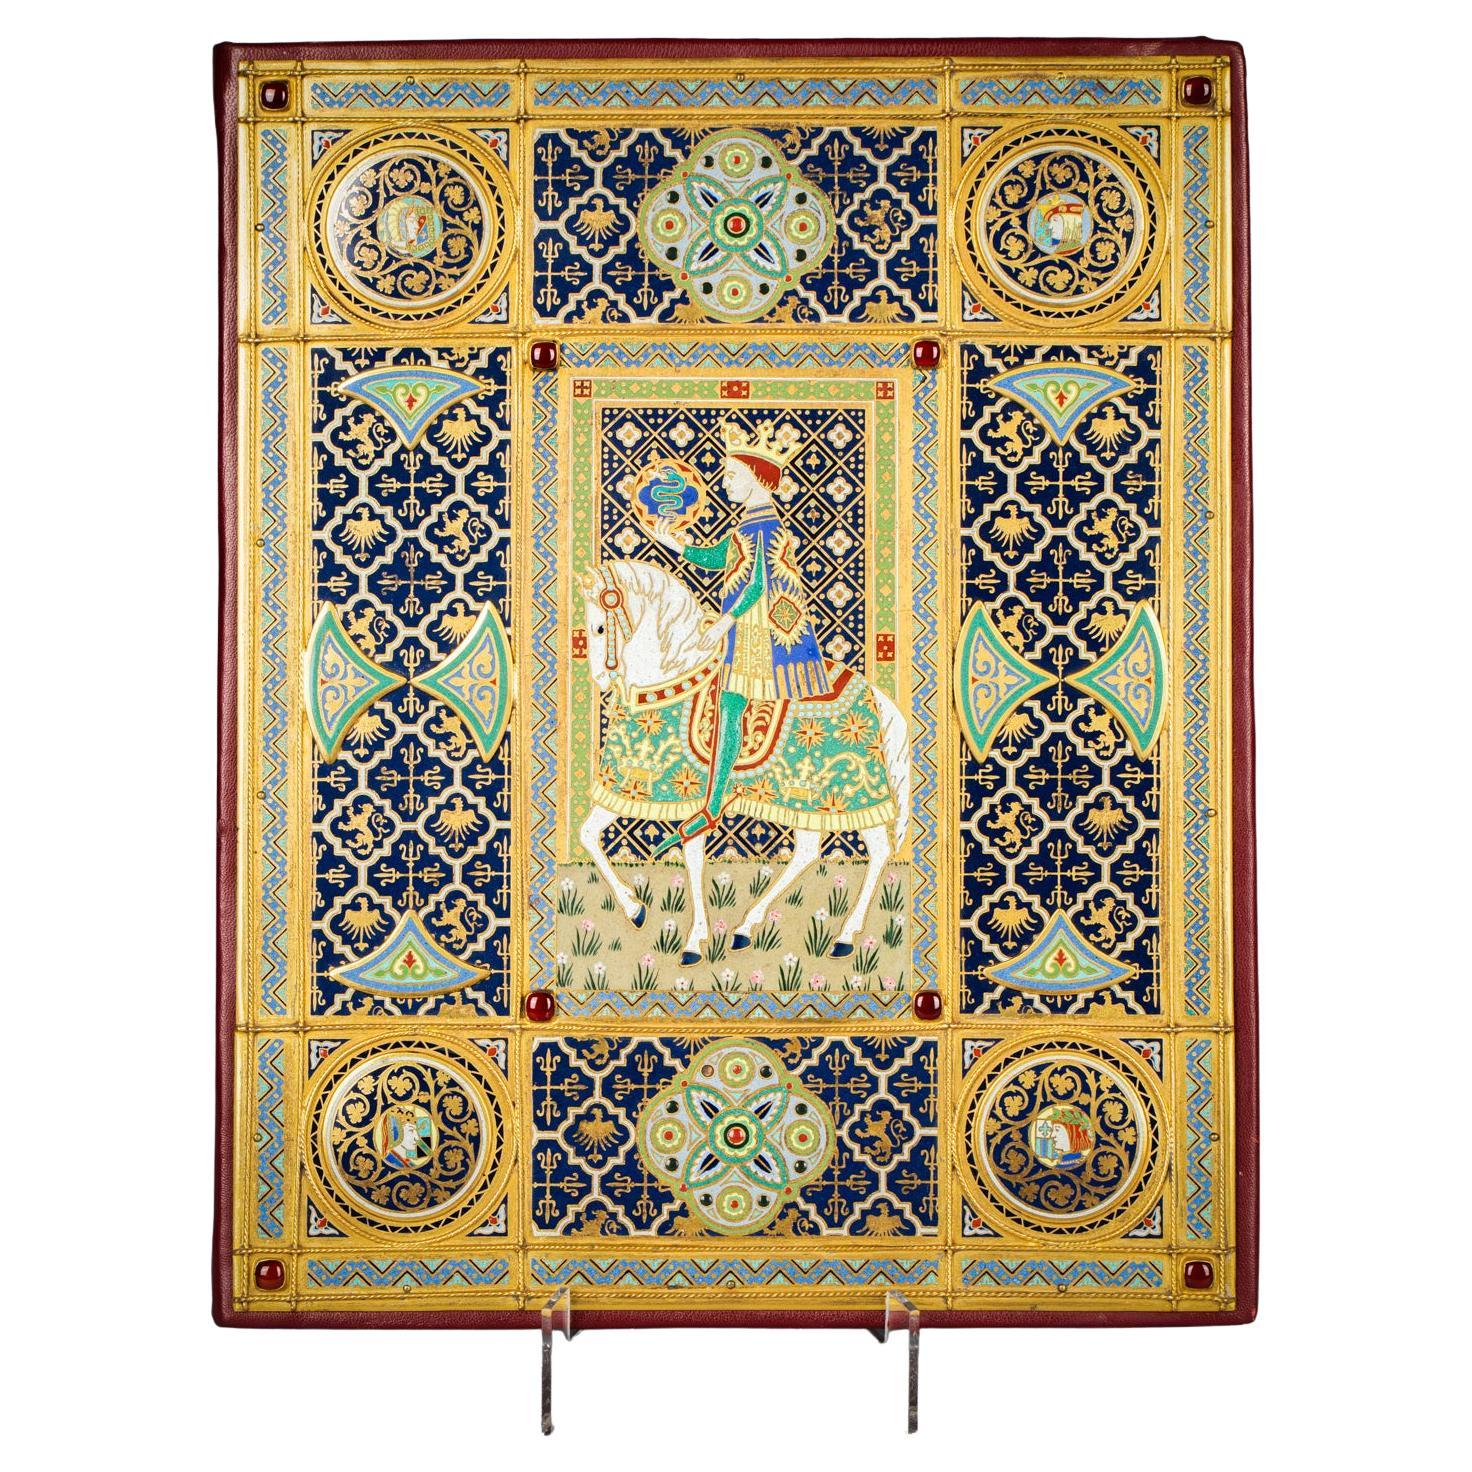 E.F. Caldwell Champlevé Enamel and Jeweled Folio Cover, Early 20th Century For Sale